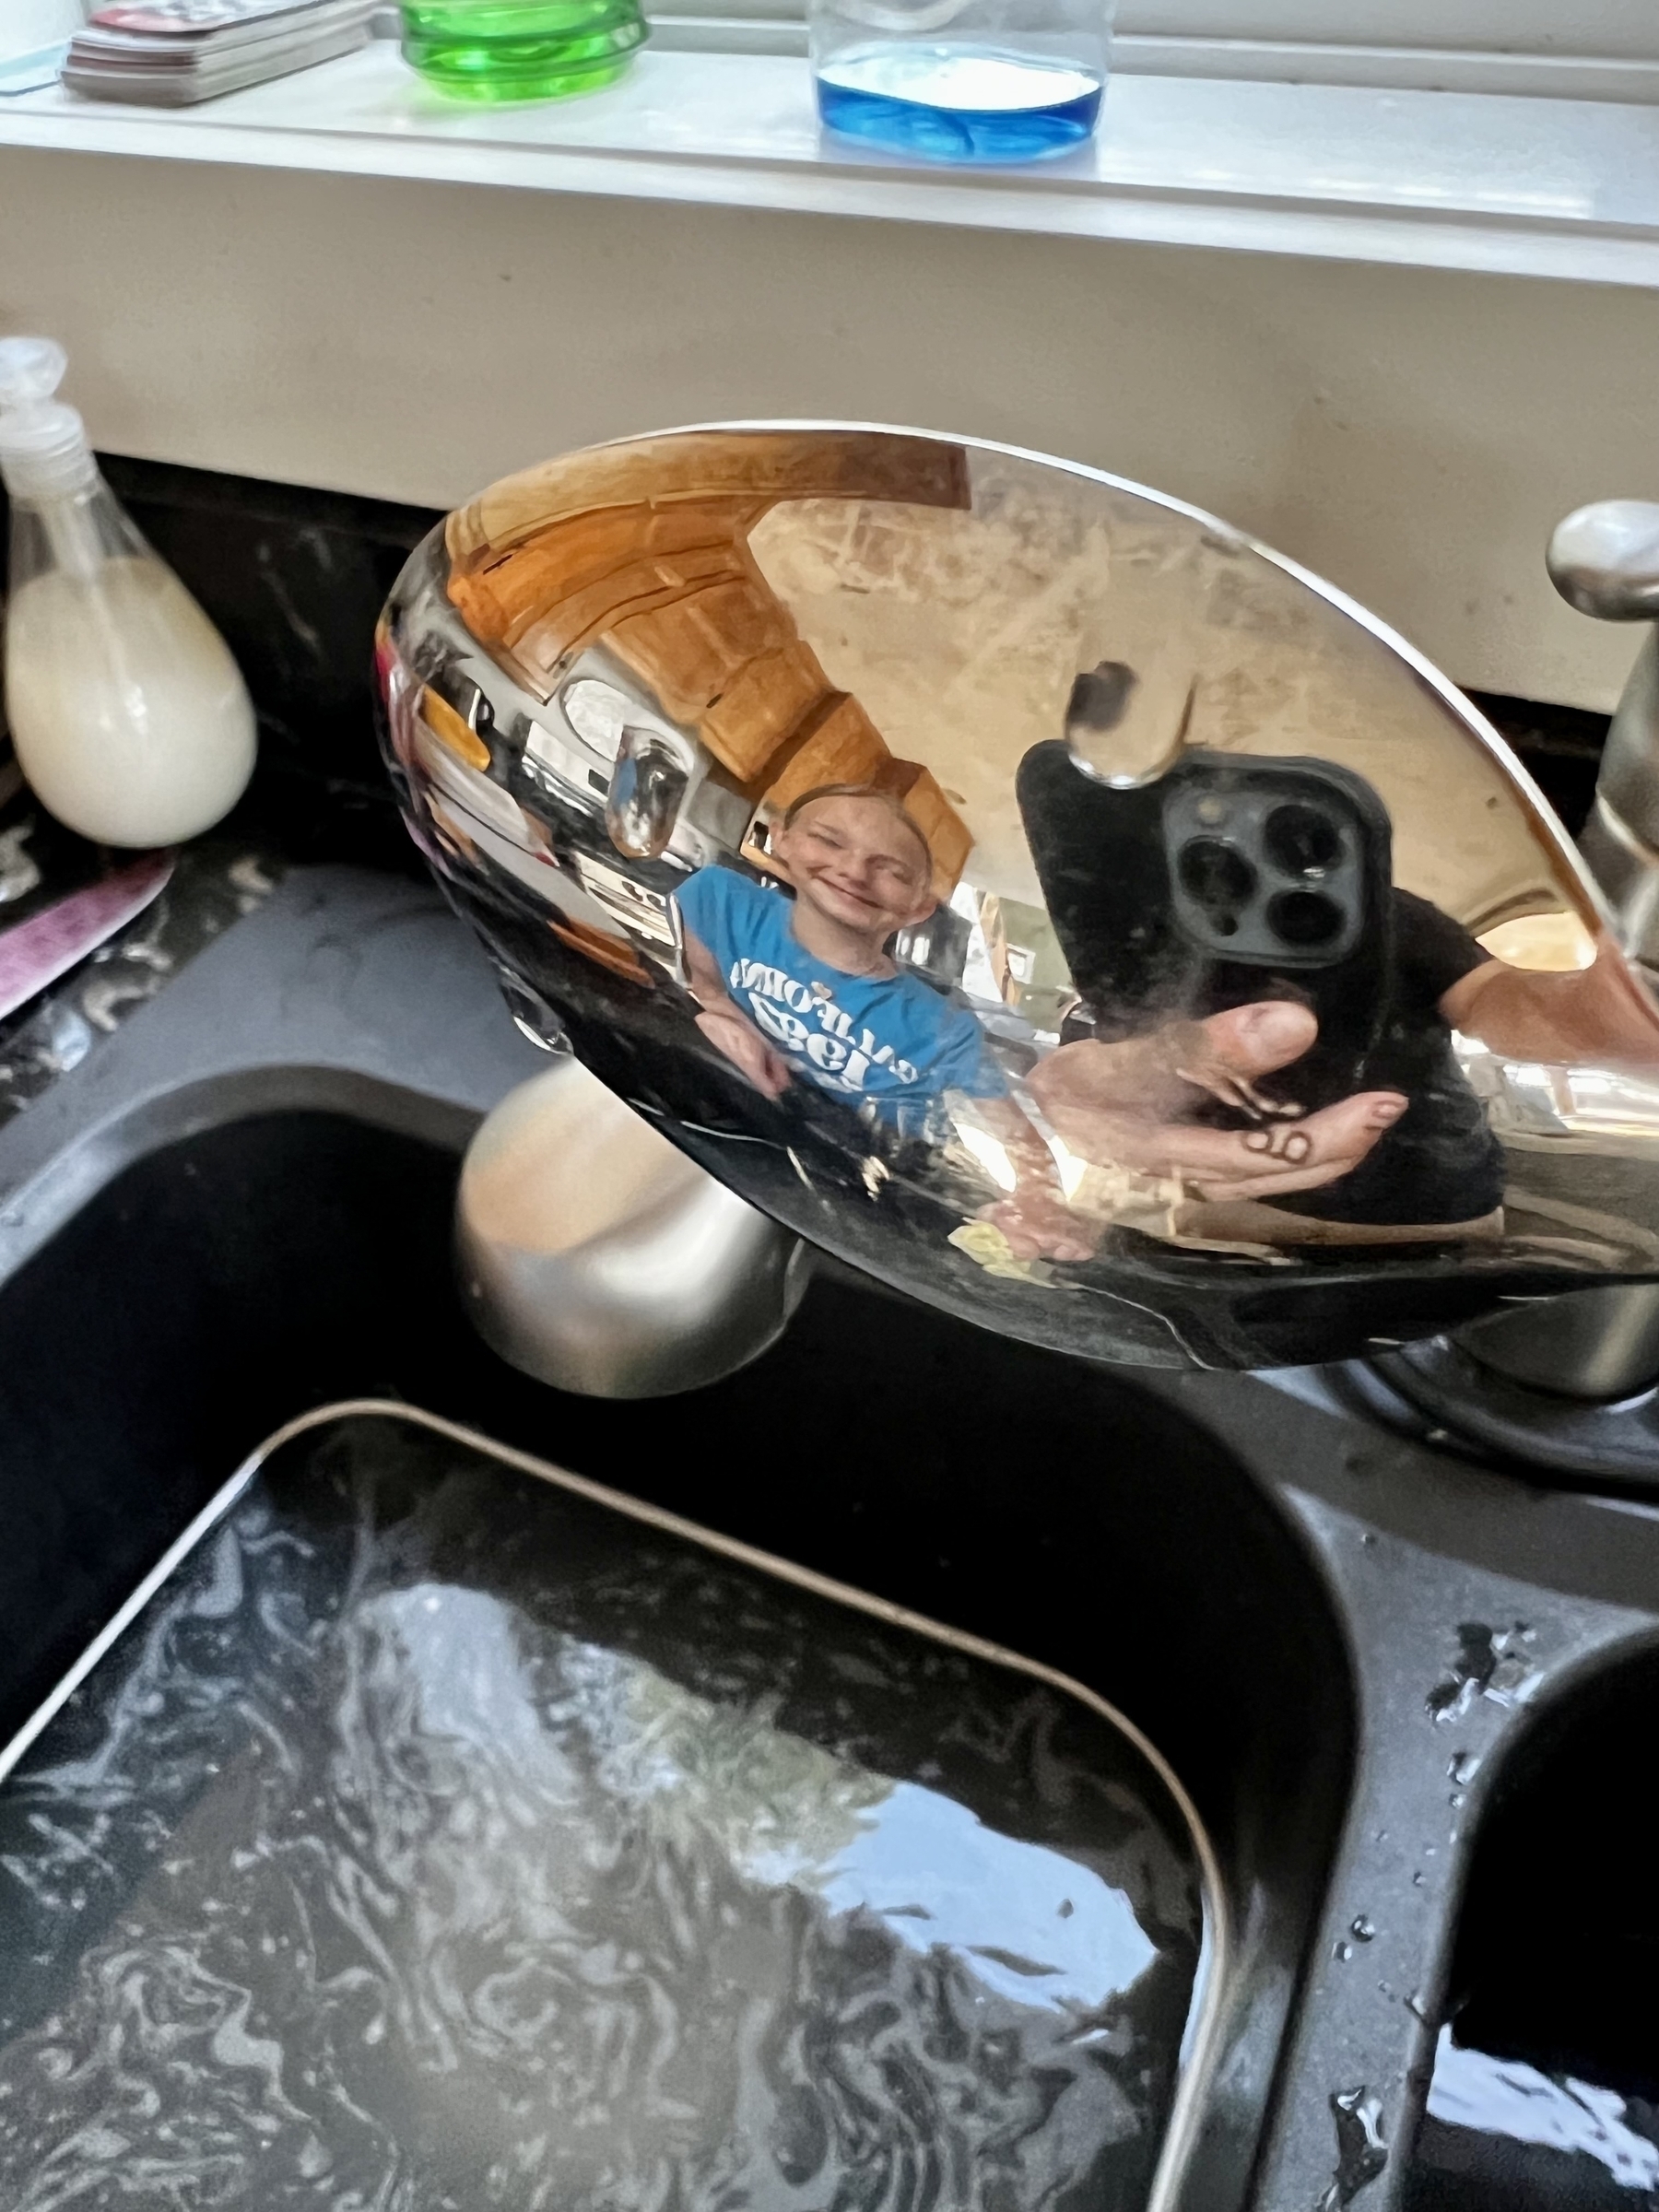 Picture of a sink with a spoon held so you can see a kid’s vague reflection in the spoon. 